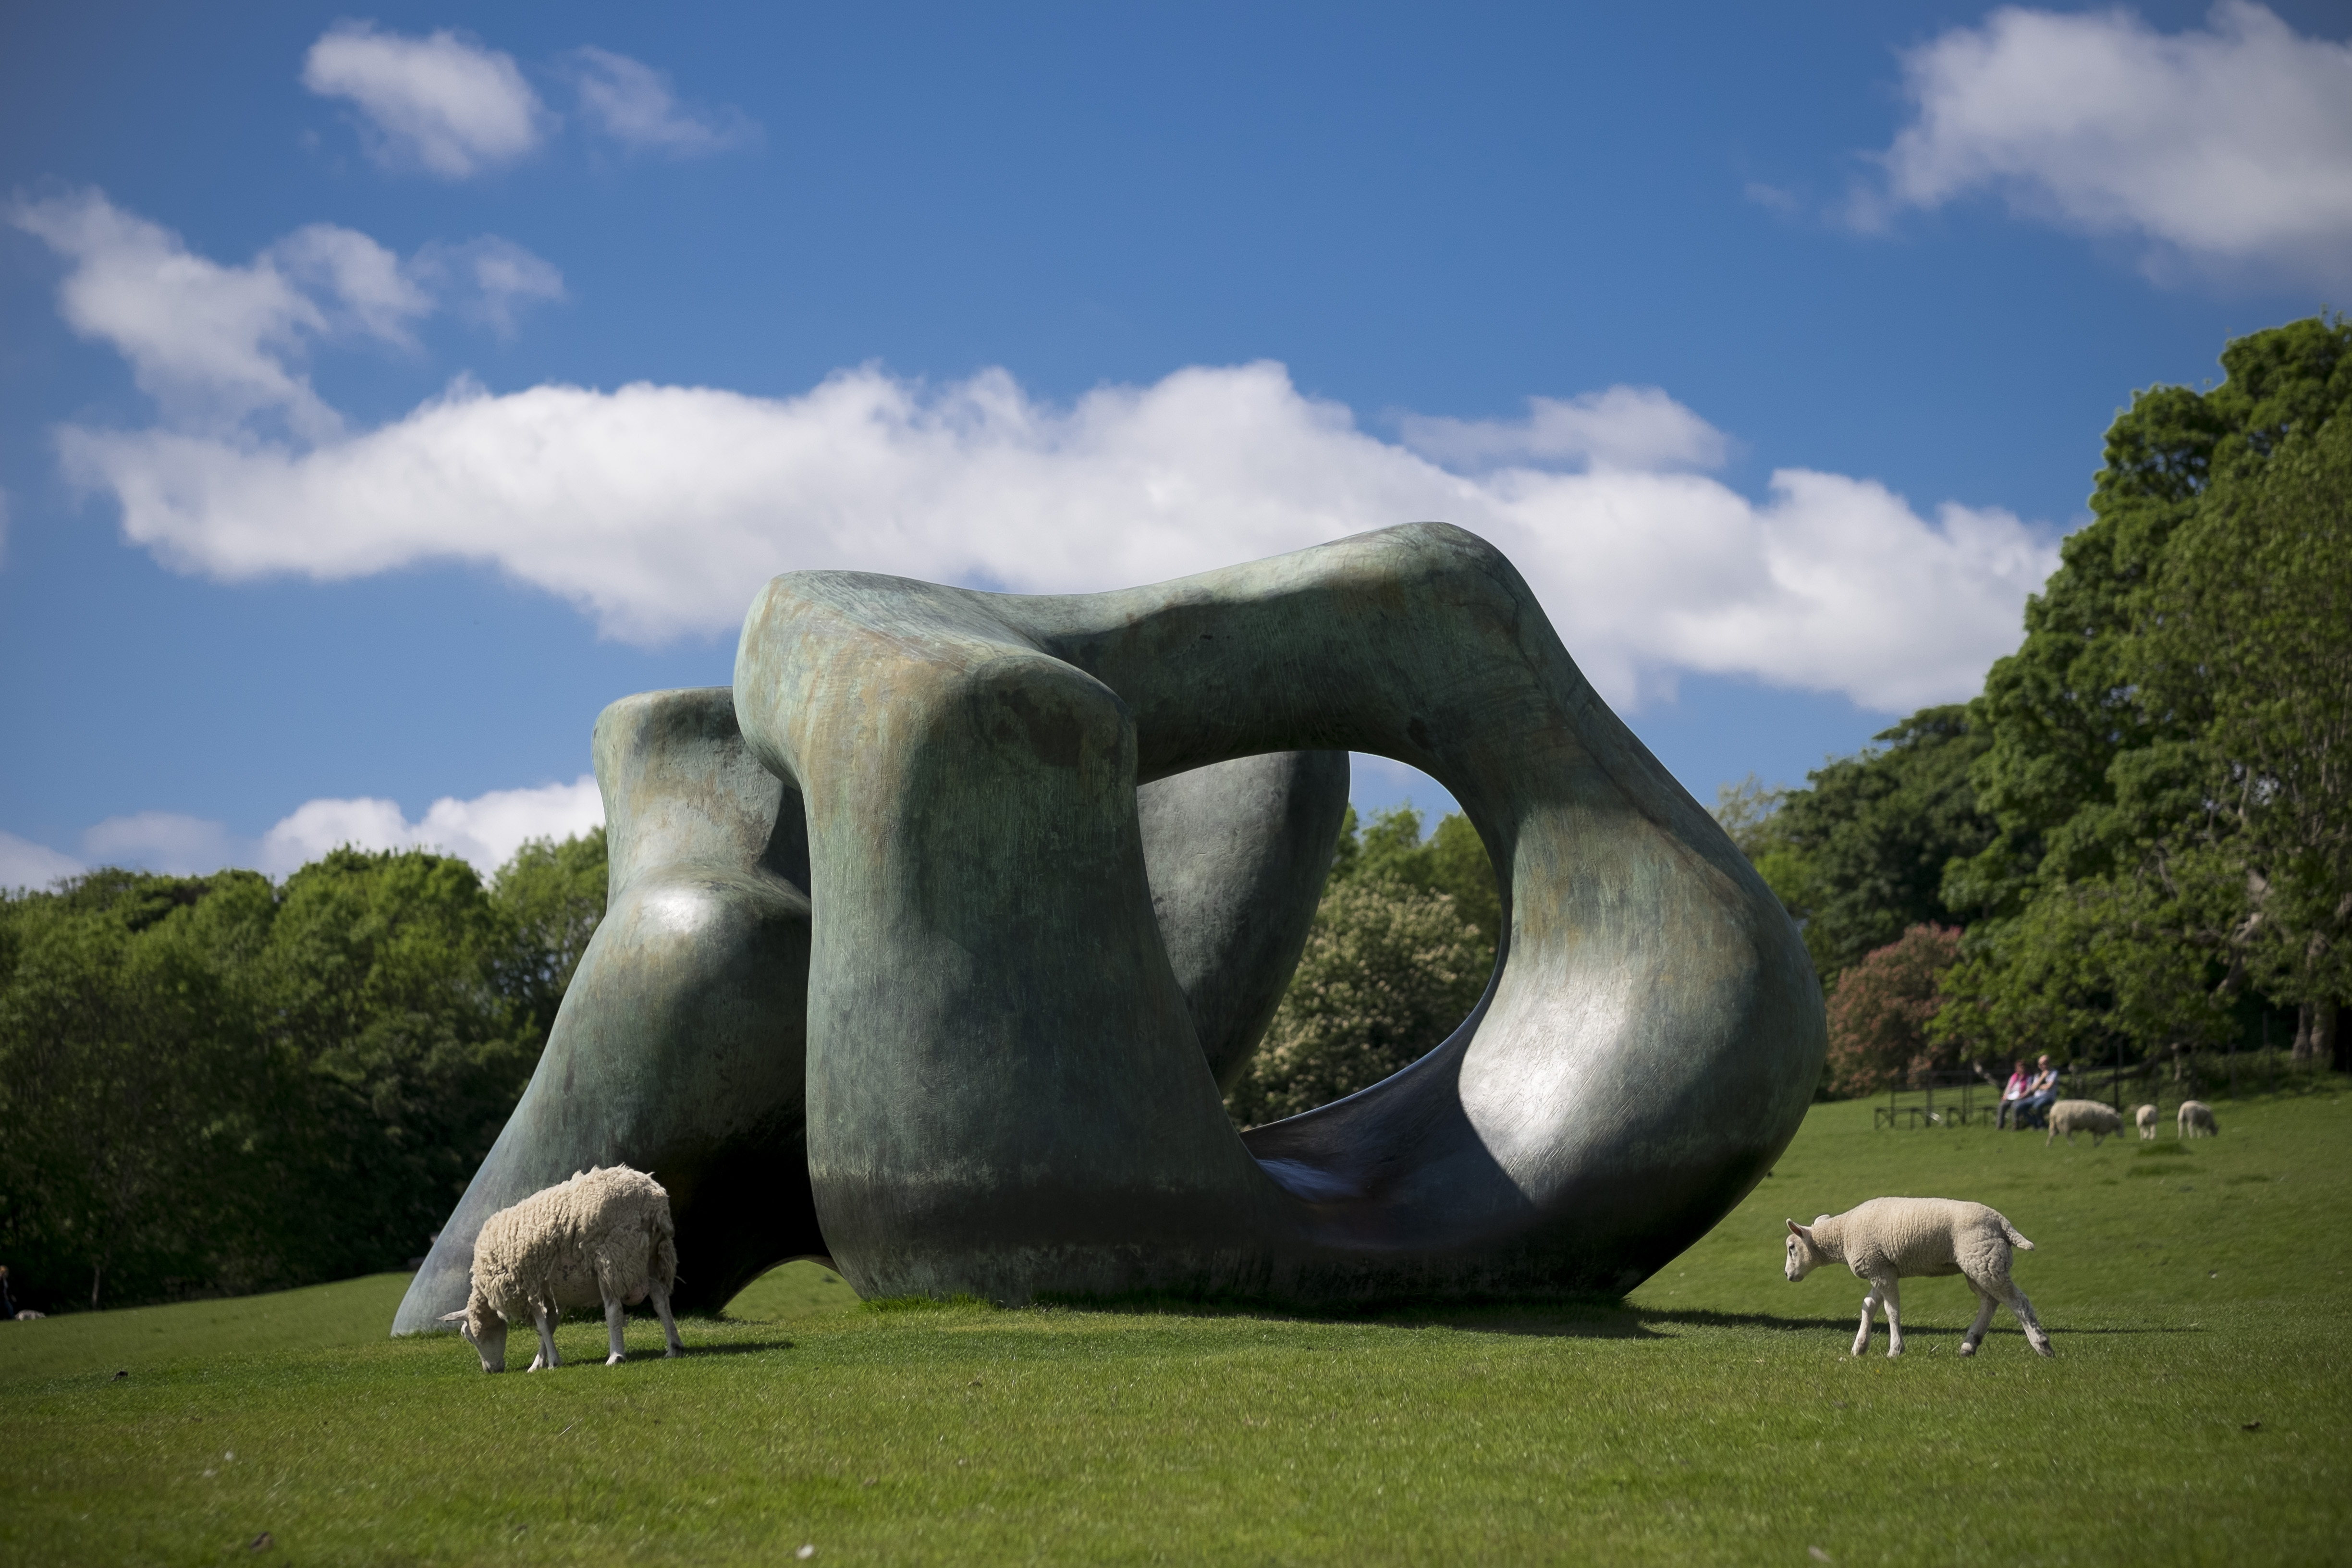 Henry-Moore-Large-Two-Forms-1966-69.-Reproduced-by-permission-of-The-Henry-Moore-Foundation.-Courtesy-Yorkshire-Sculpture-Park.-Photo-c-Jonty-Wilde.jpg